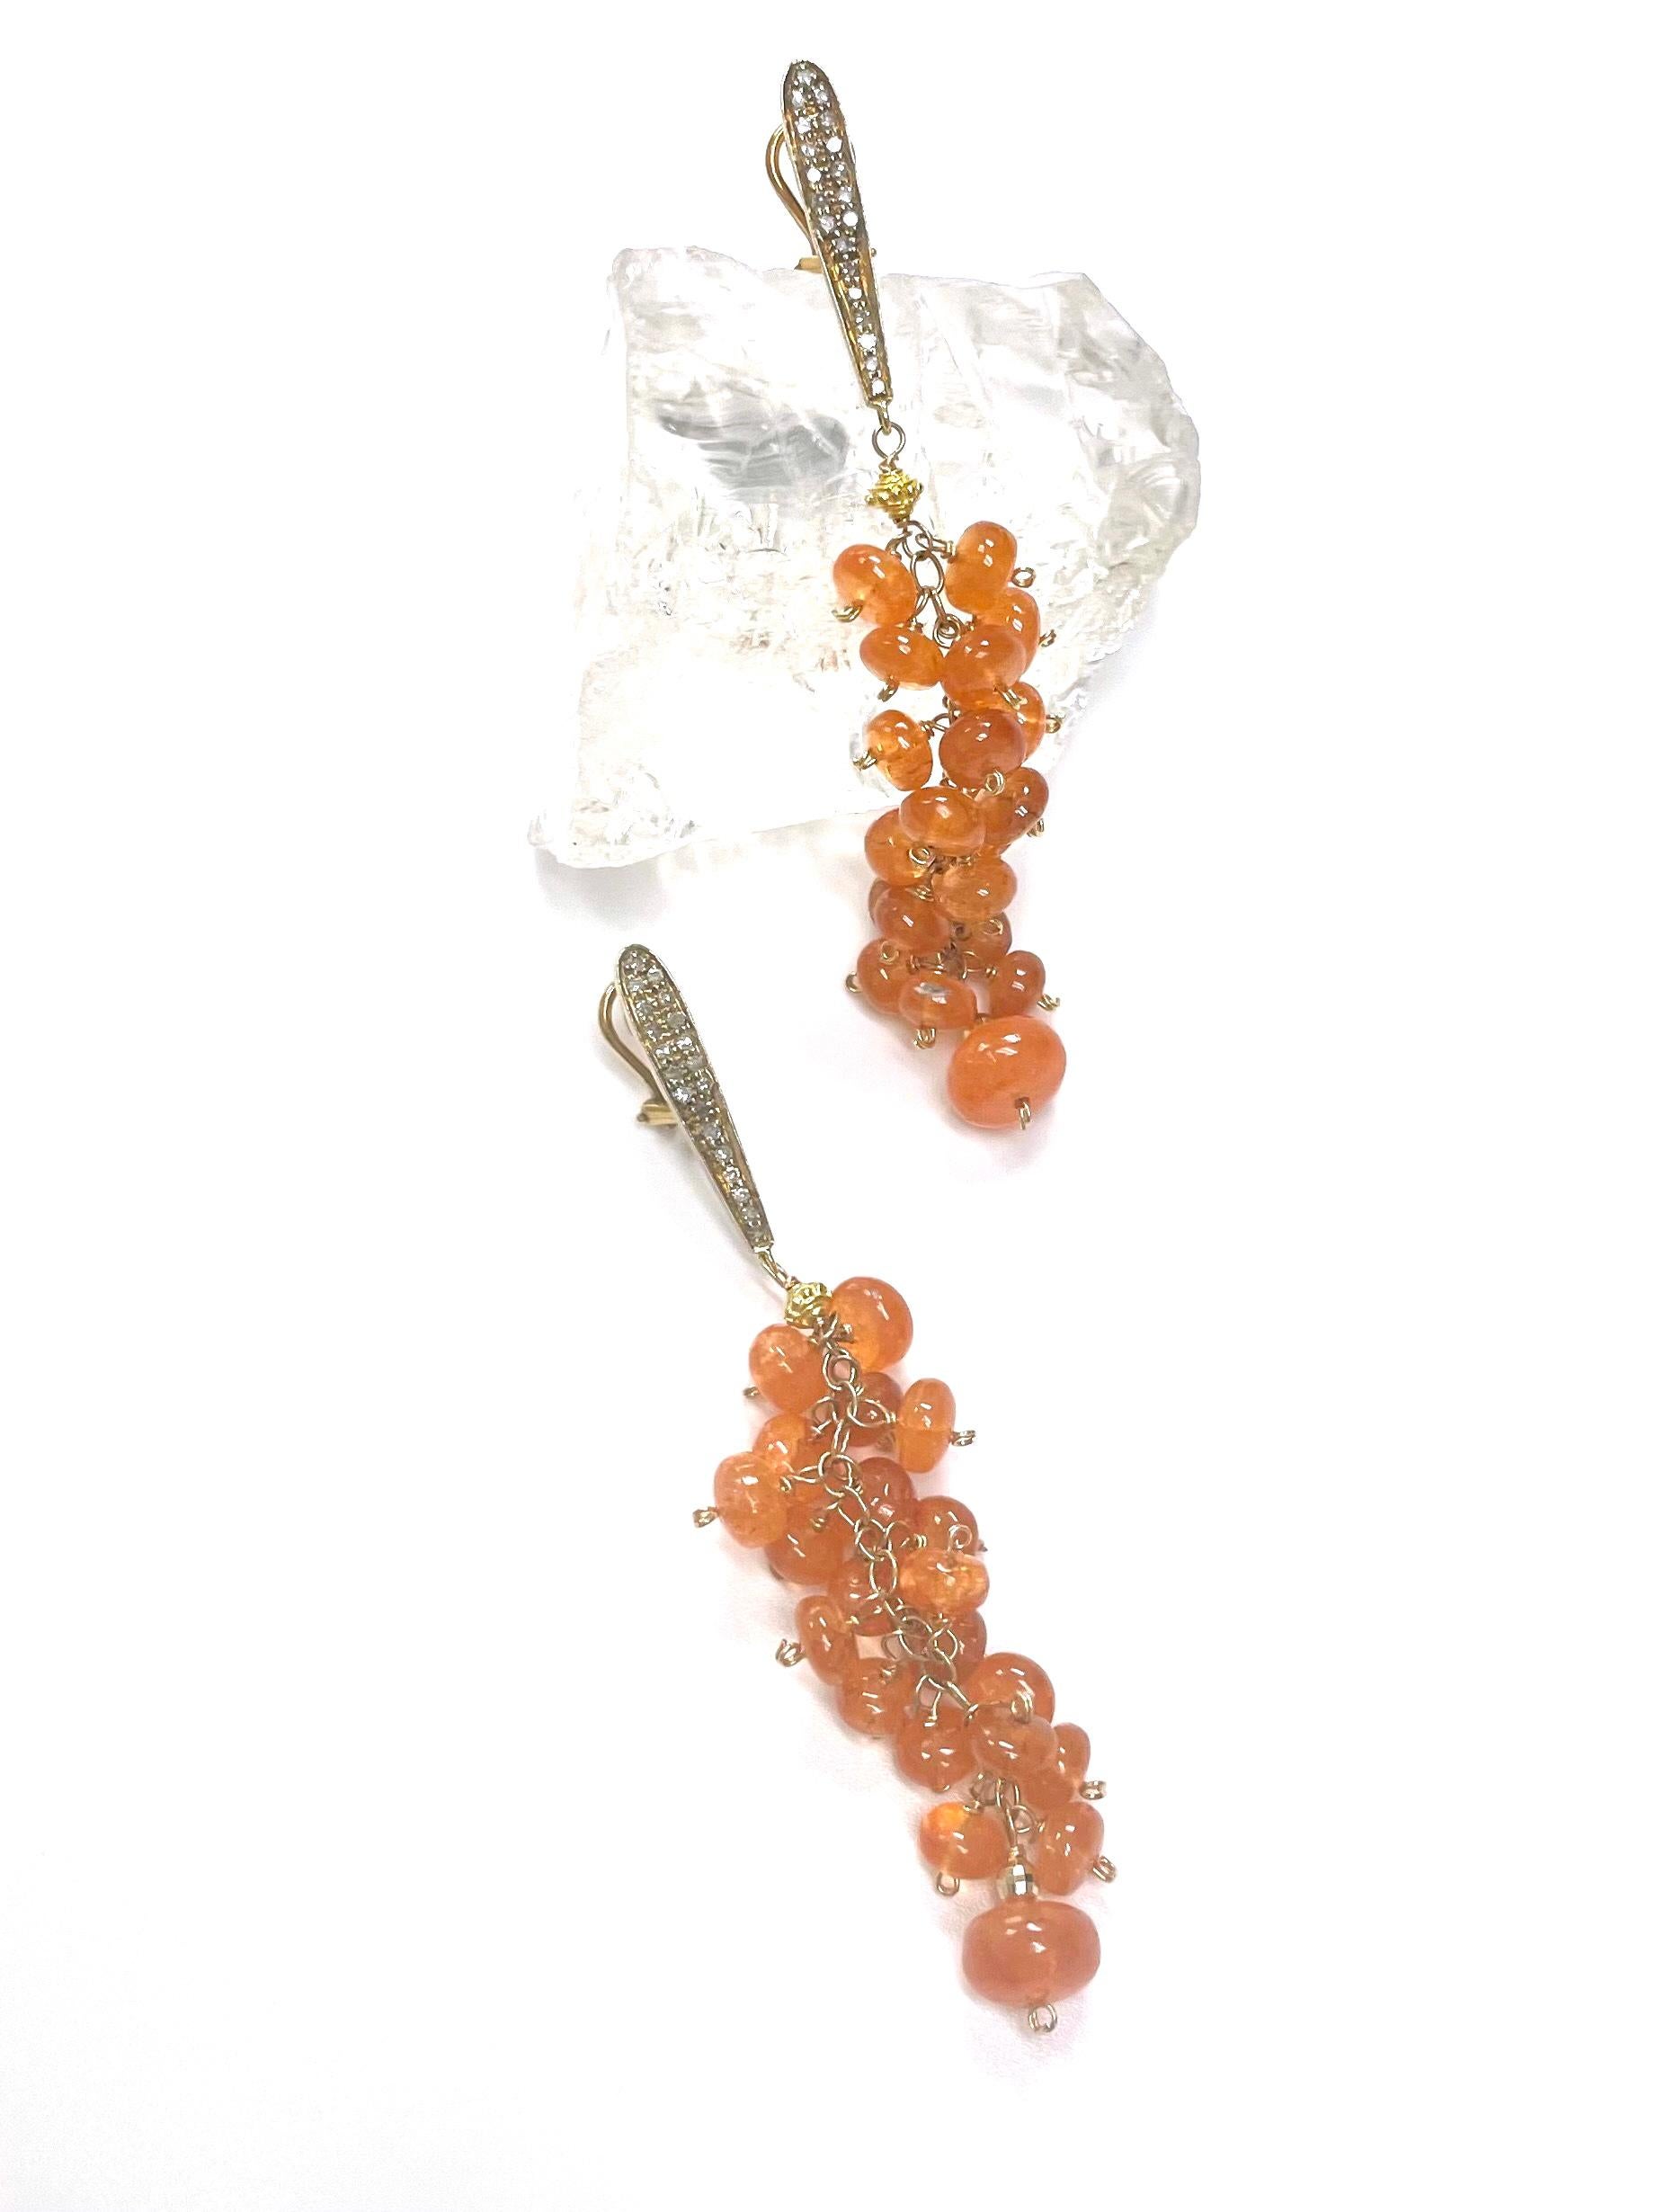 Description
Vibrant Spessartite garnet individually hand wrapped with 14k yellow gold wire, suspended from vermeil pave diamond ear posts. 
Item # E3290
Check out matching necklaces (see photos), Item # N3796 (multi strand) and N3703